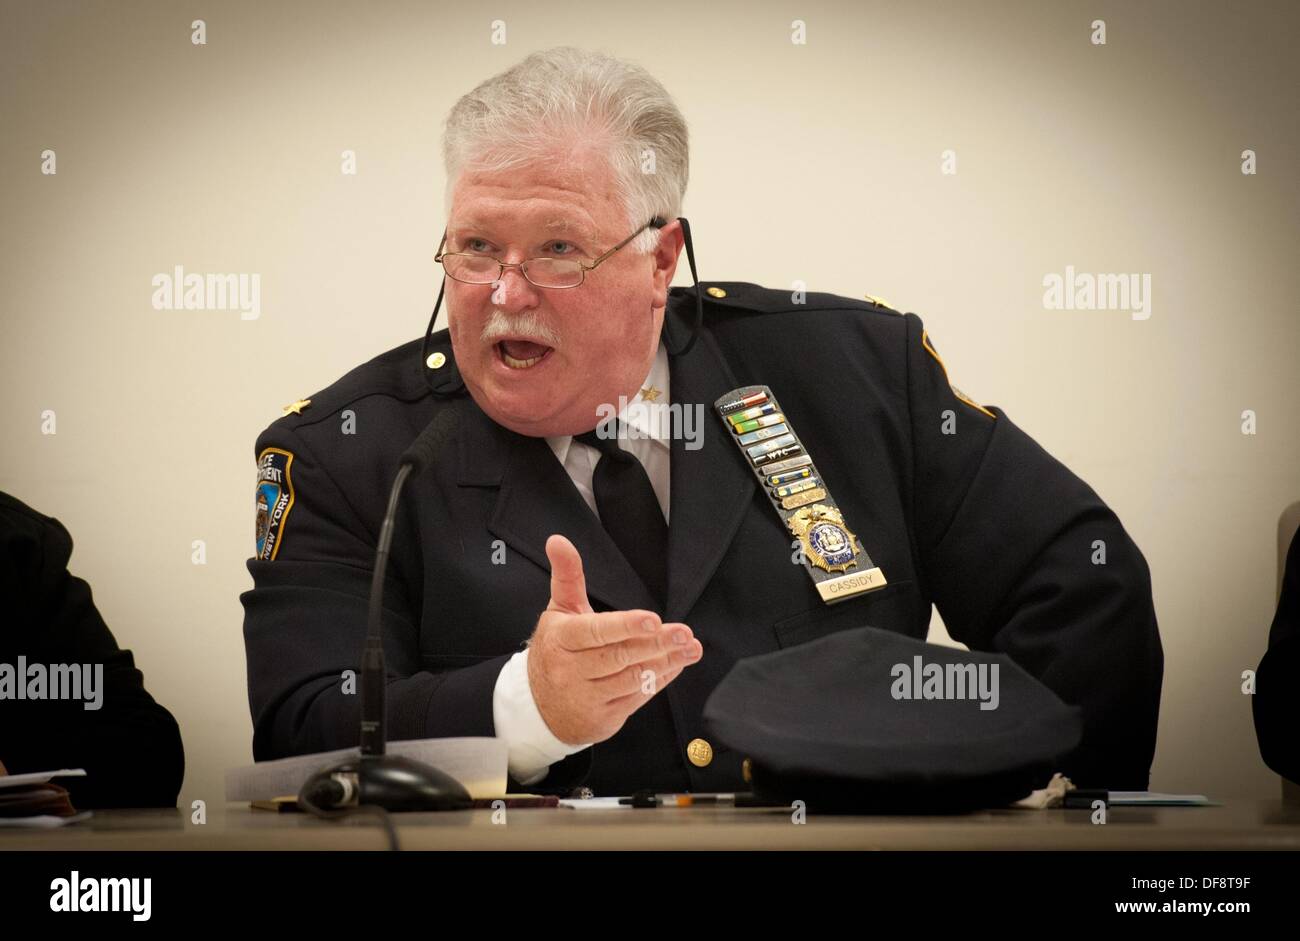 Manhattan, New York, USA. 30th Sep, 2013. NYPD Deputy Chief JOHN CASSIDY speaks as the Council of the City of New York holds an oversight hearing examining the NYPD's Collision Investigation reforms, Monday September 30, 2013. Credit:  Bryan Smith/ZUMAPRESS.com/Alamy Live News Stock Photo